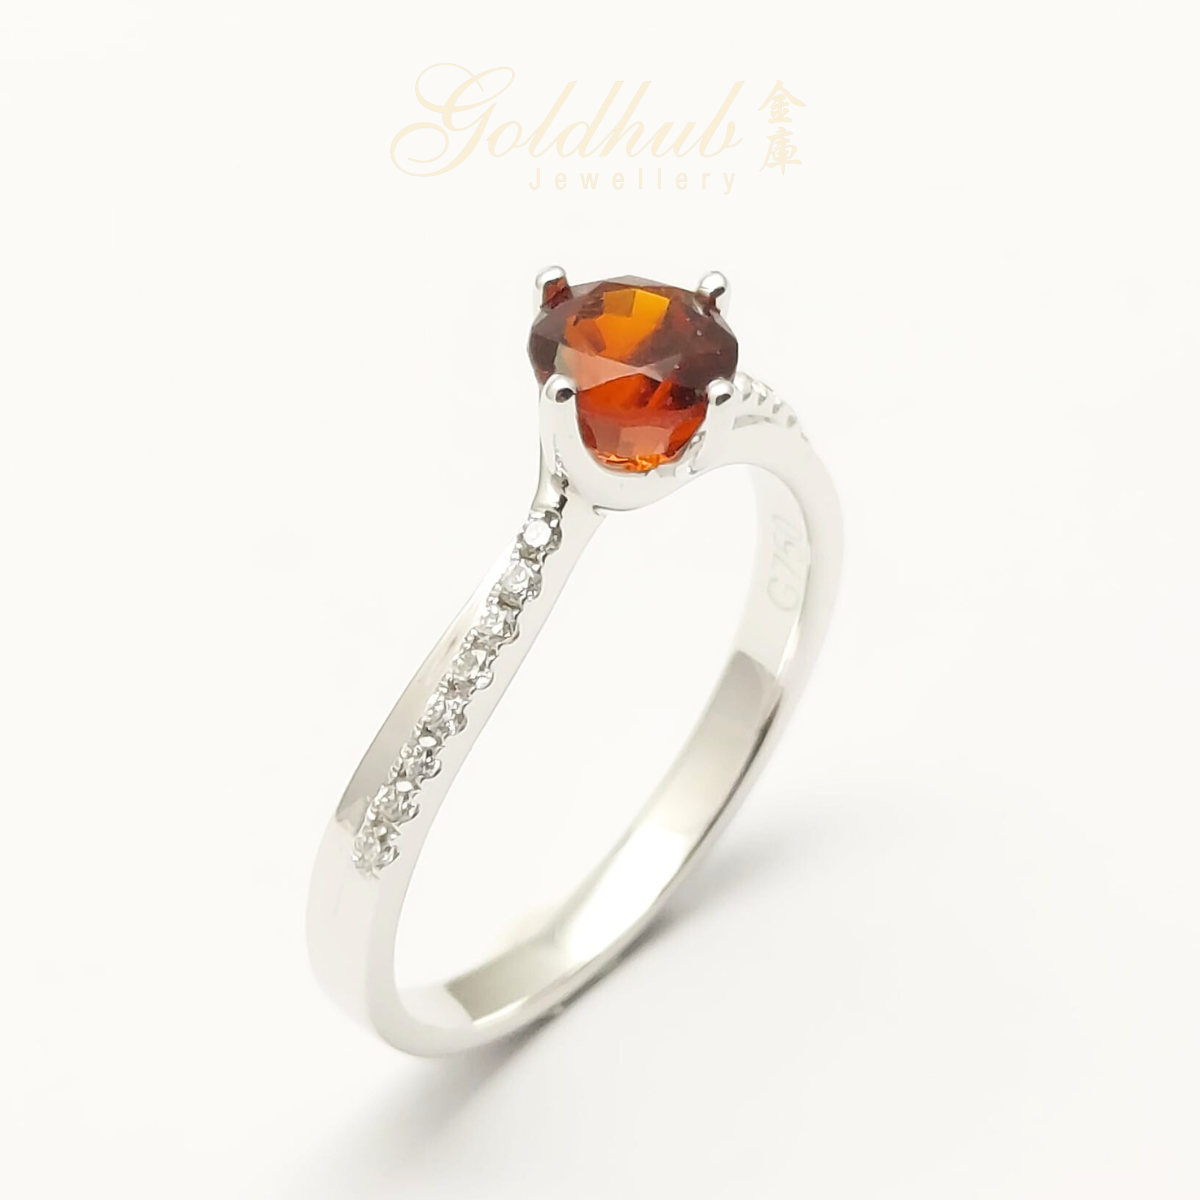 [FURTHER DISCOUNTED] 18k Garnet Diamond Ring in White Gold